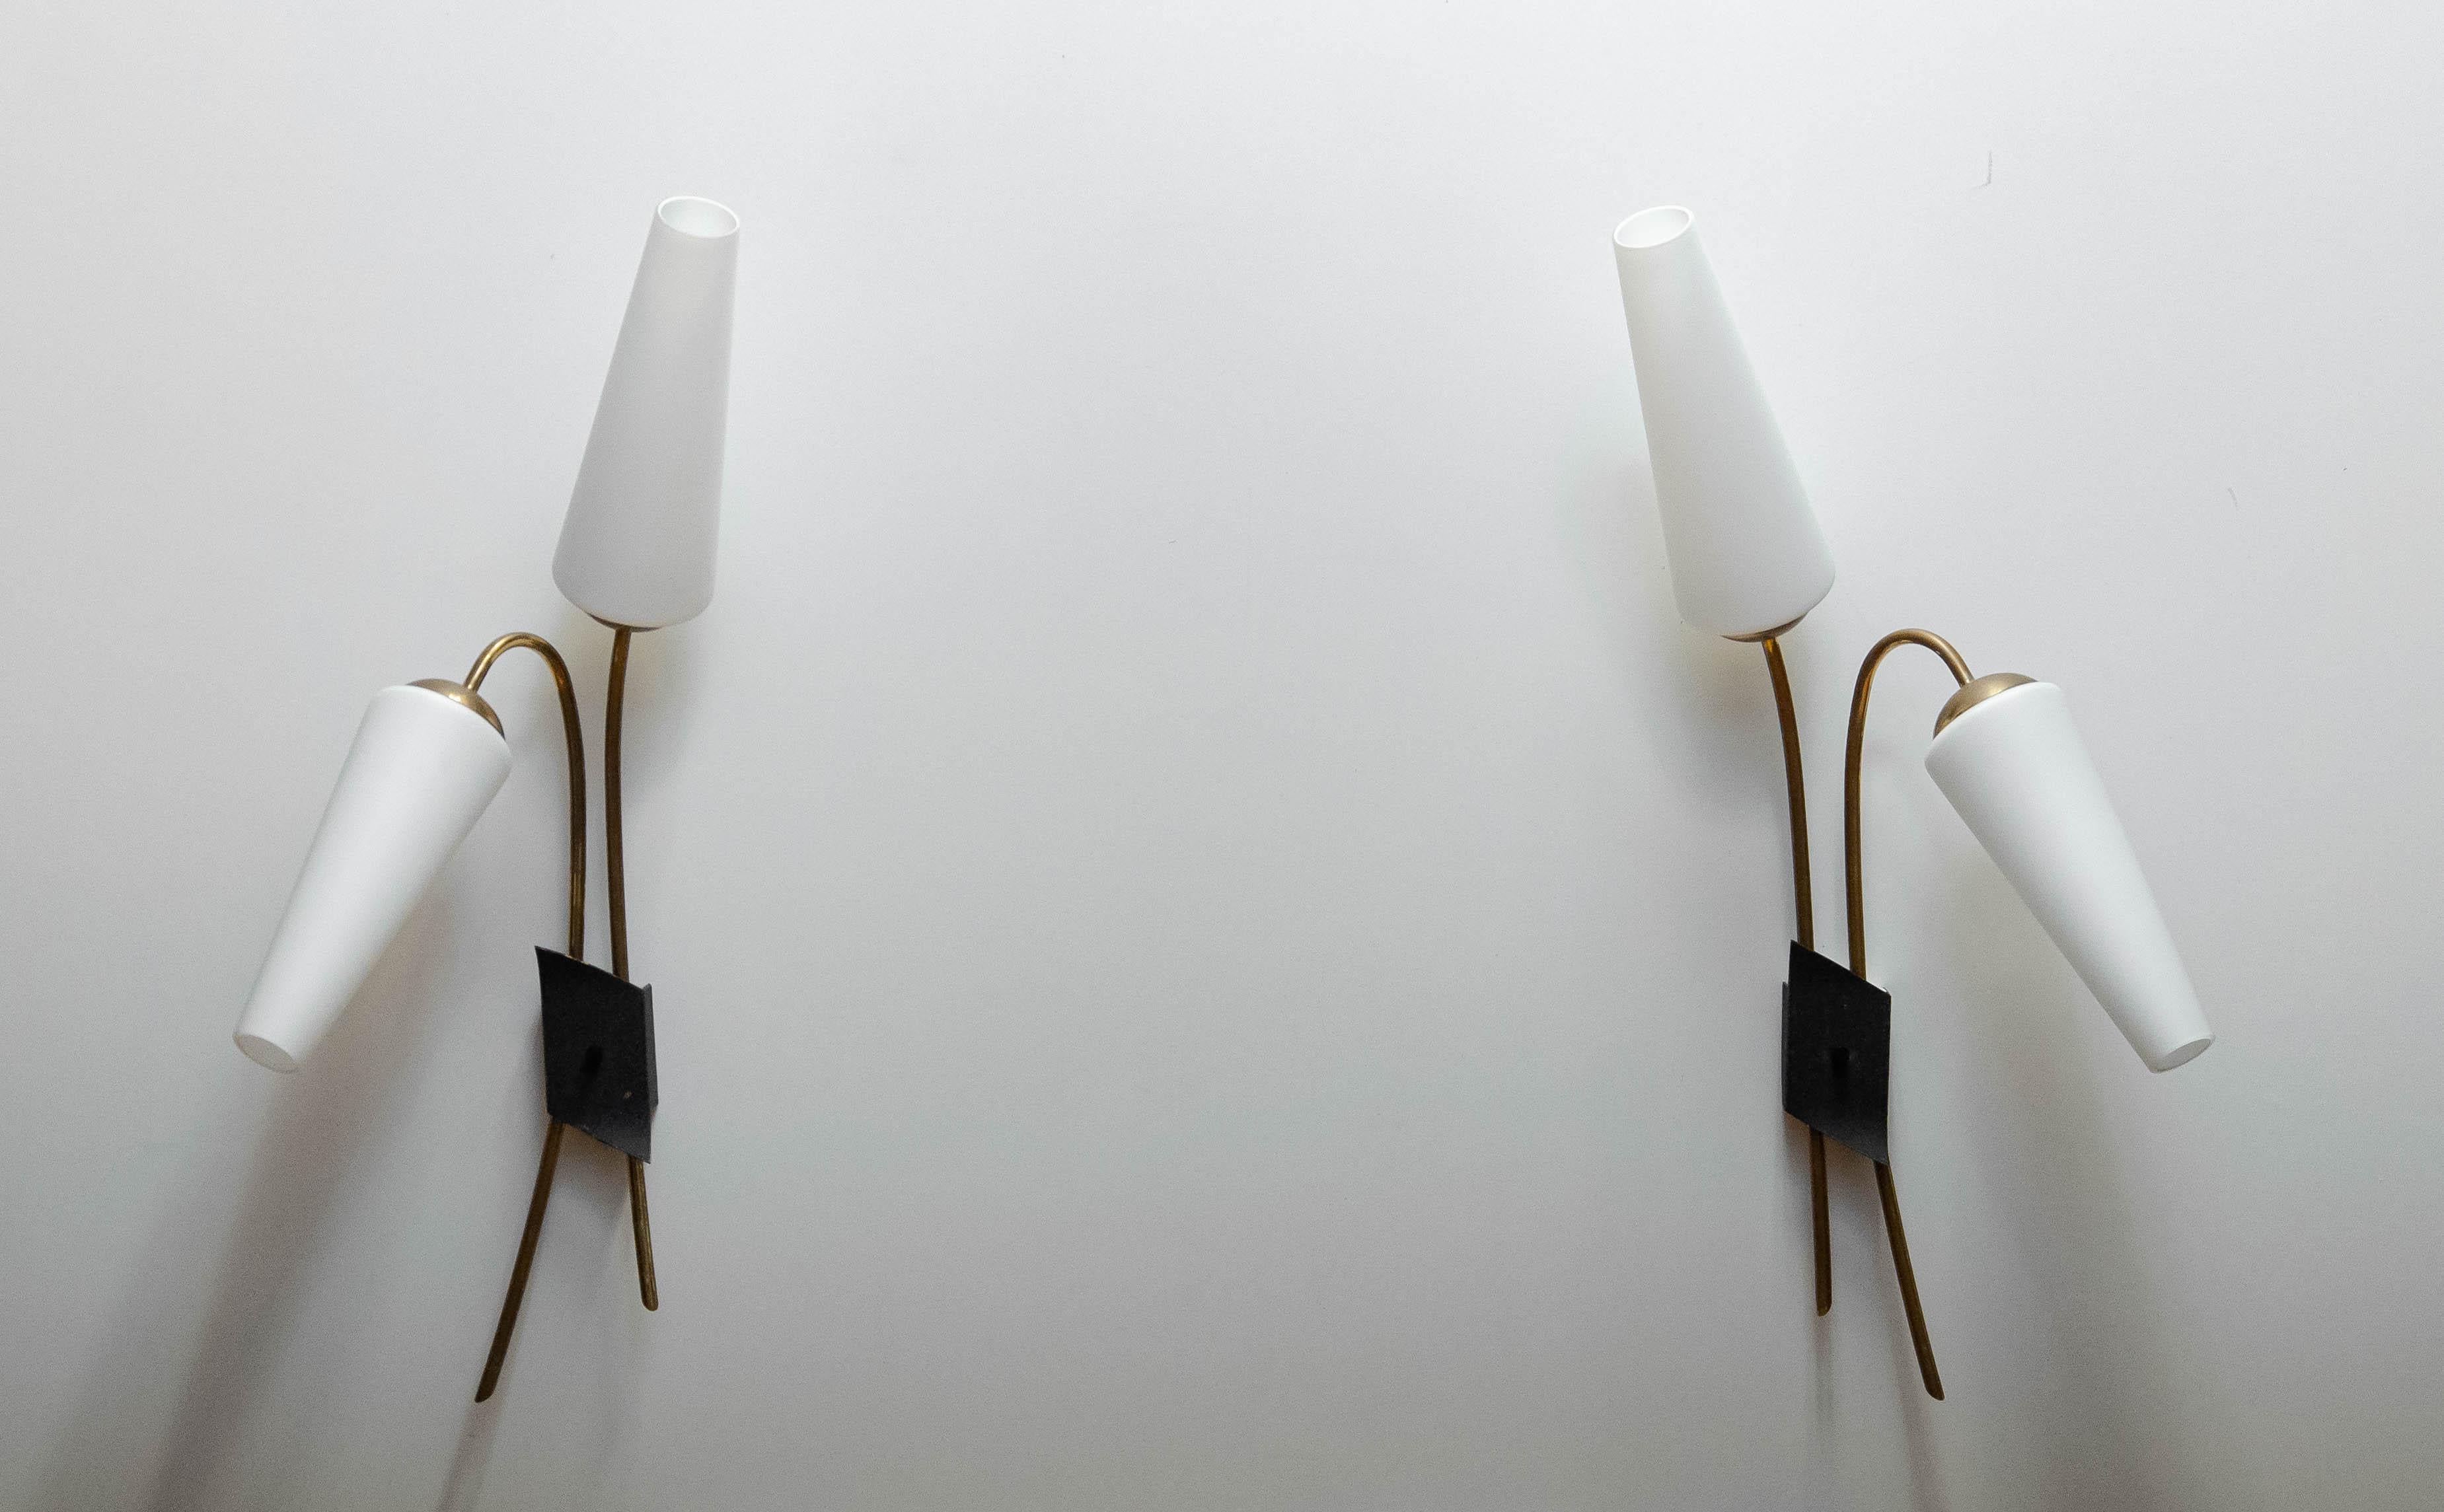 Mid-Century Modern Pair French Brass And Opal Wall Lights / Sconces By Maison Lunel From The 1950s For Sale